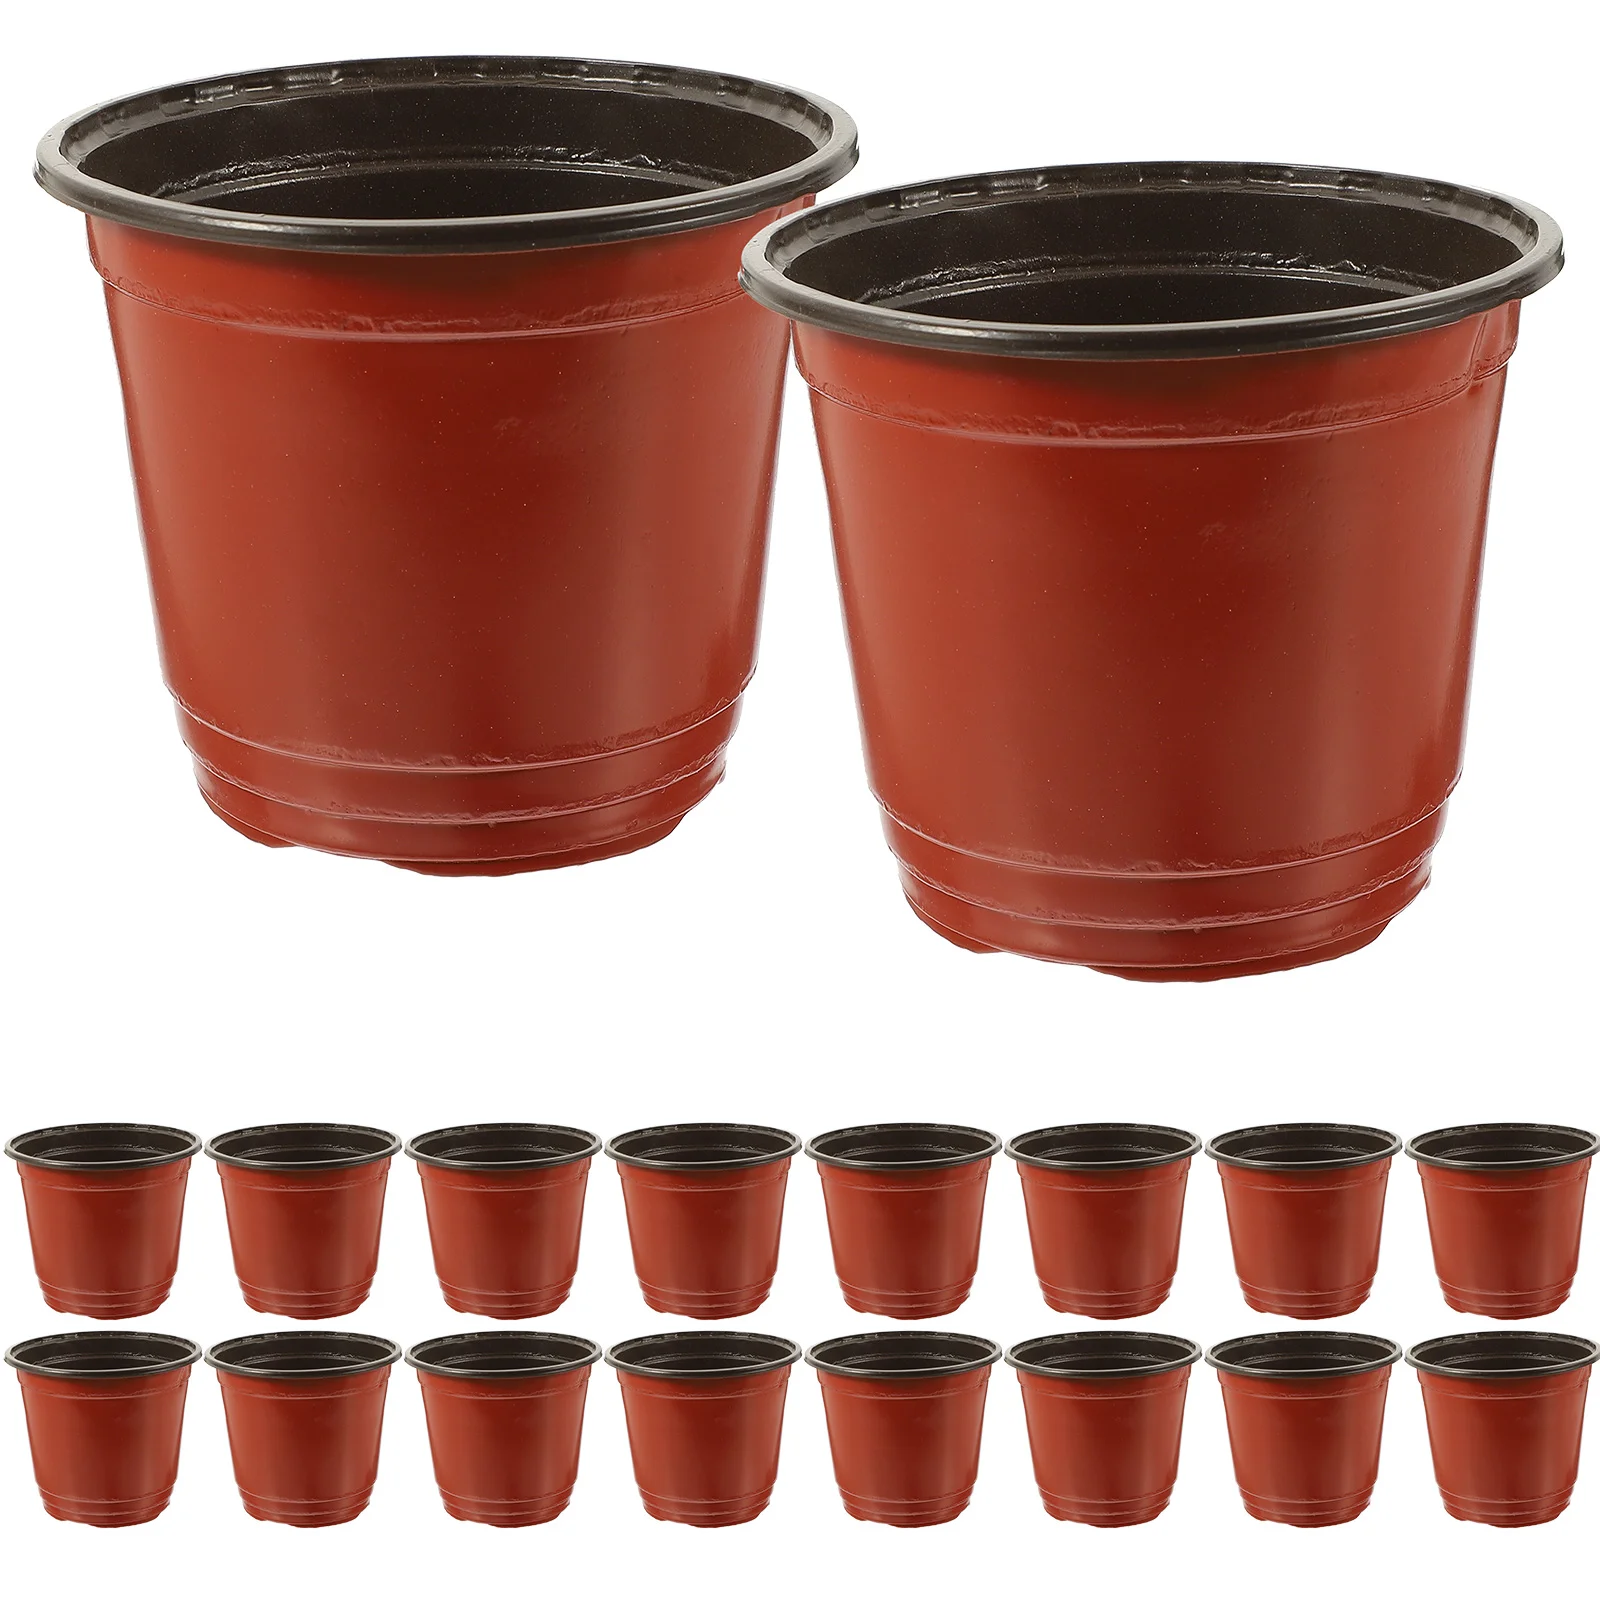 

50Pcs Nursery Pots Flower Container For Succulents Cuttings Transplanting- Diameter 120mm ( Brown ) Plants